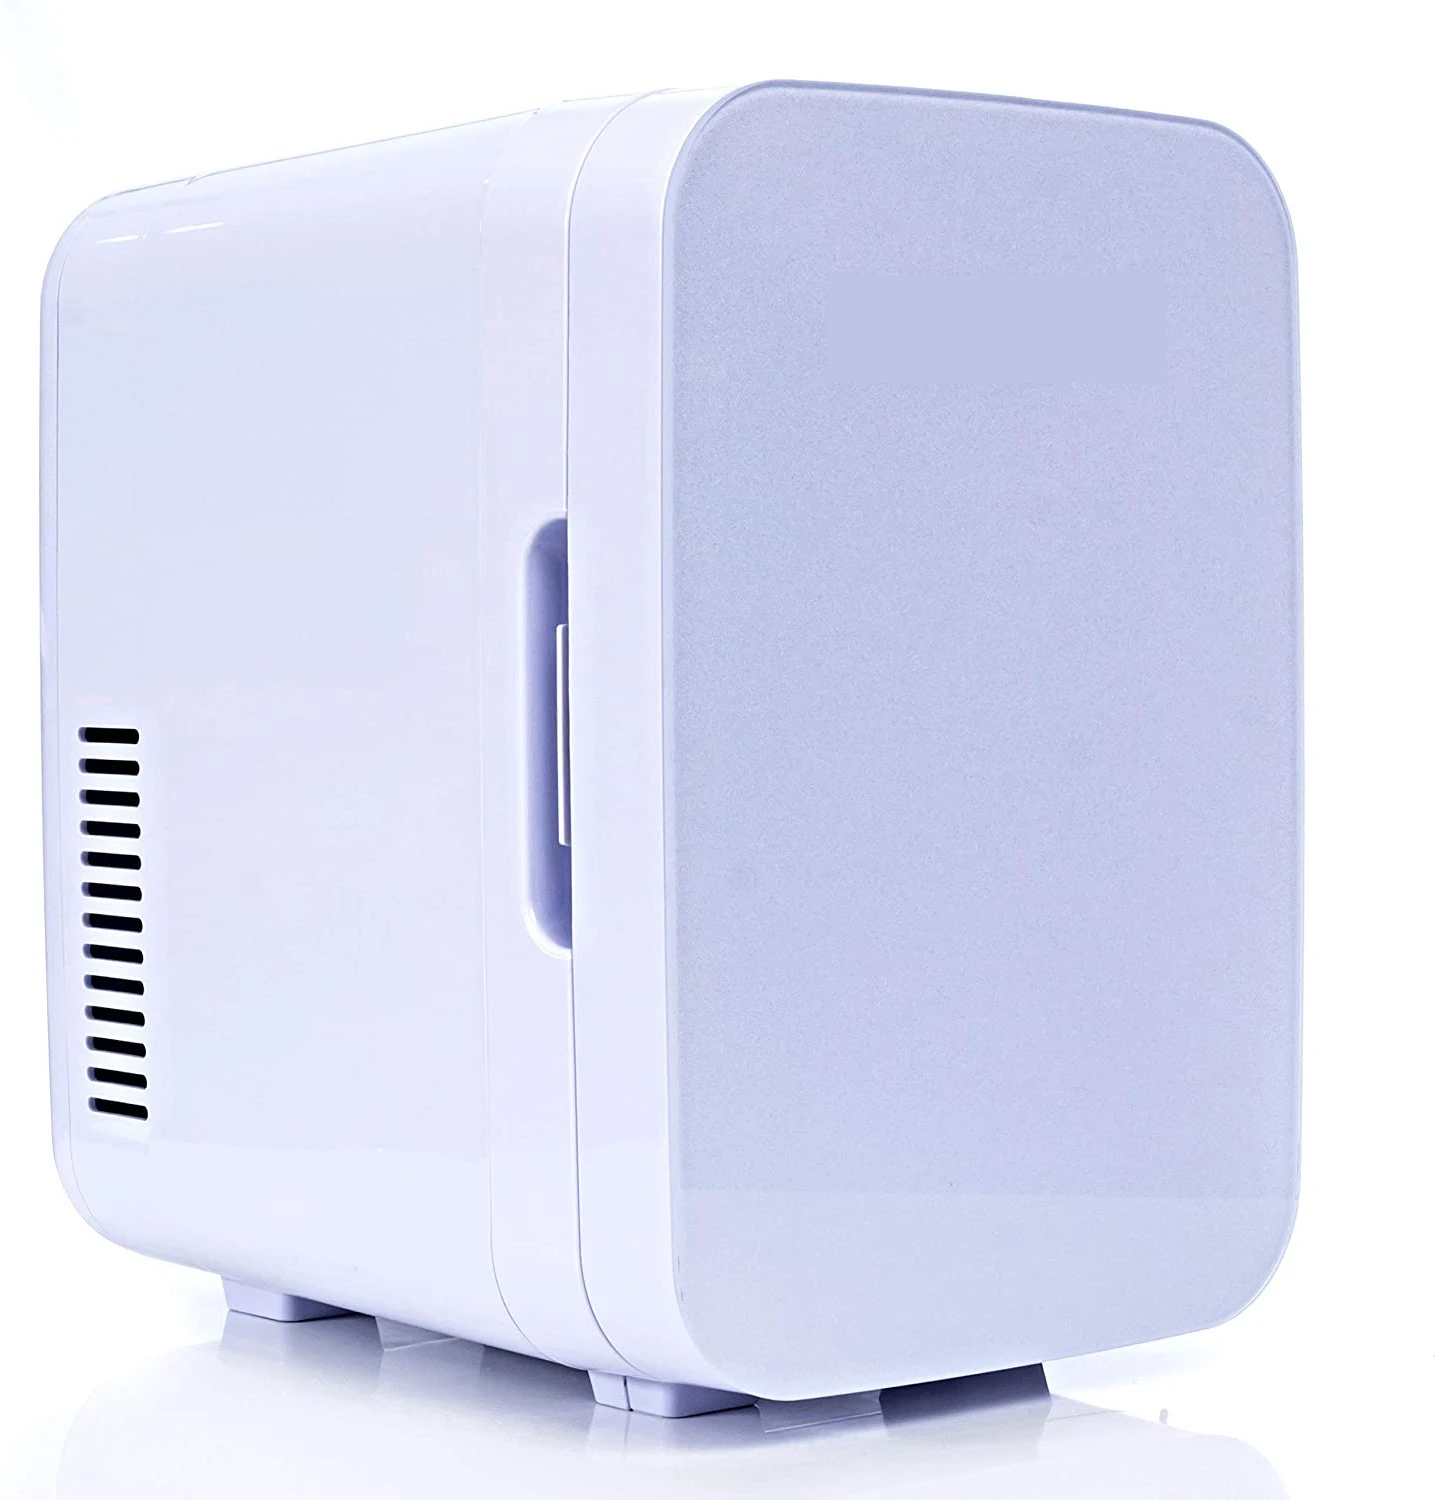 camping fridge for sale 6 Liter Compact Portable Mini Fridge for Bedroom, Office, Car, Dorm with Thermoelectric Cooler and Warmer, Small Refrigerator car freezer